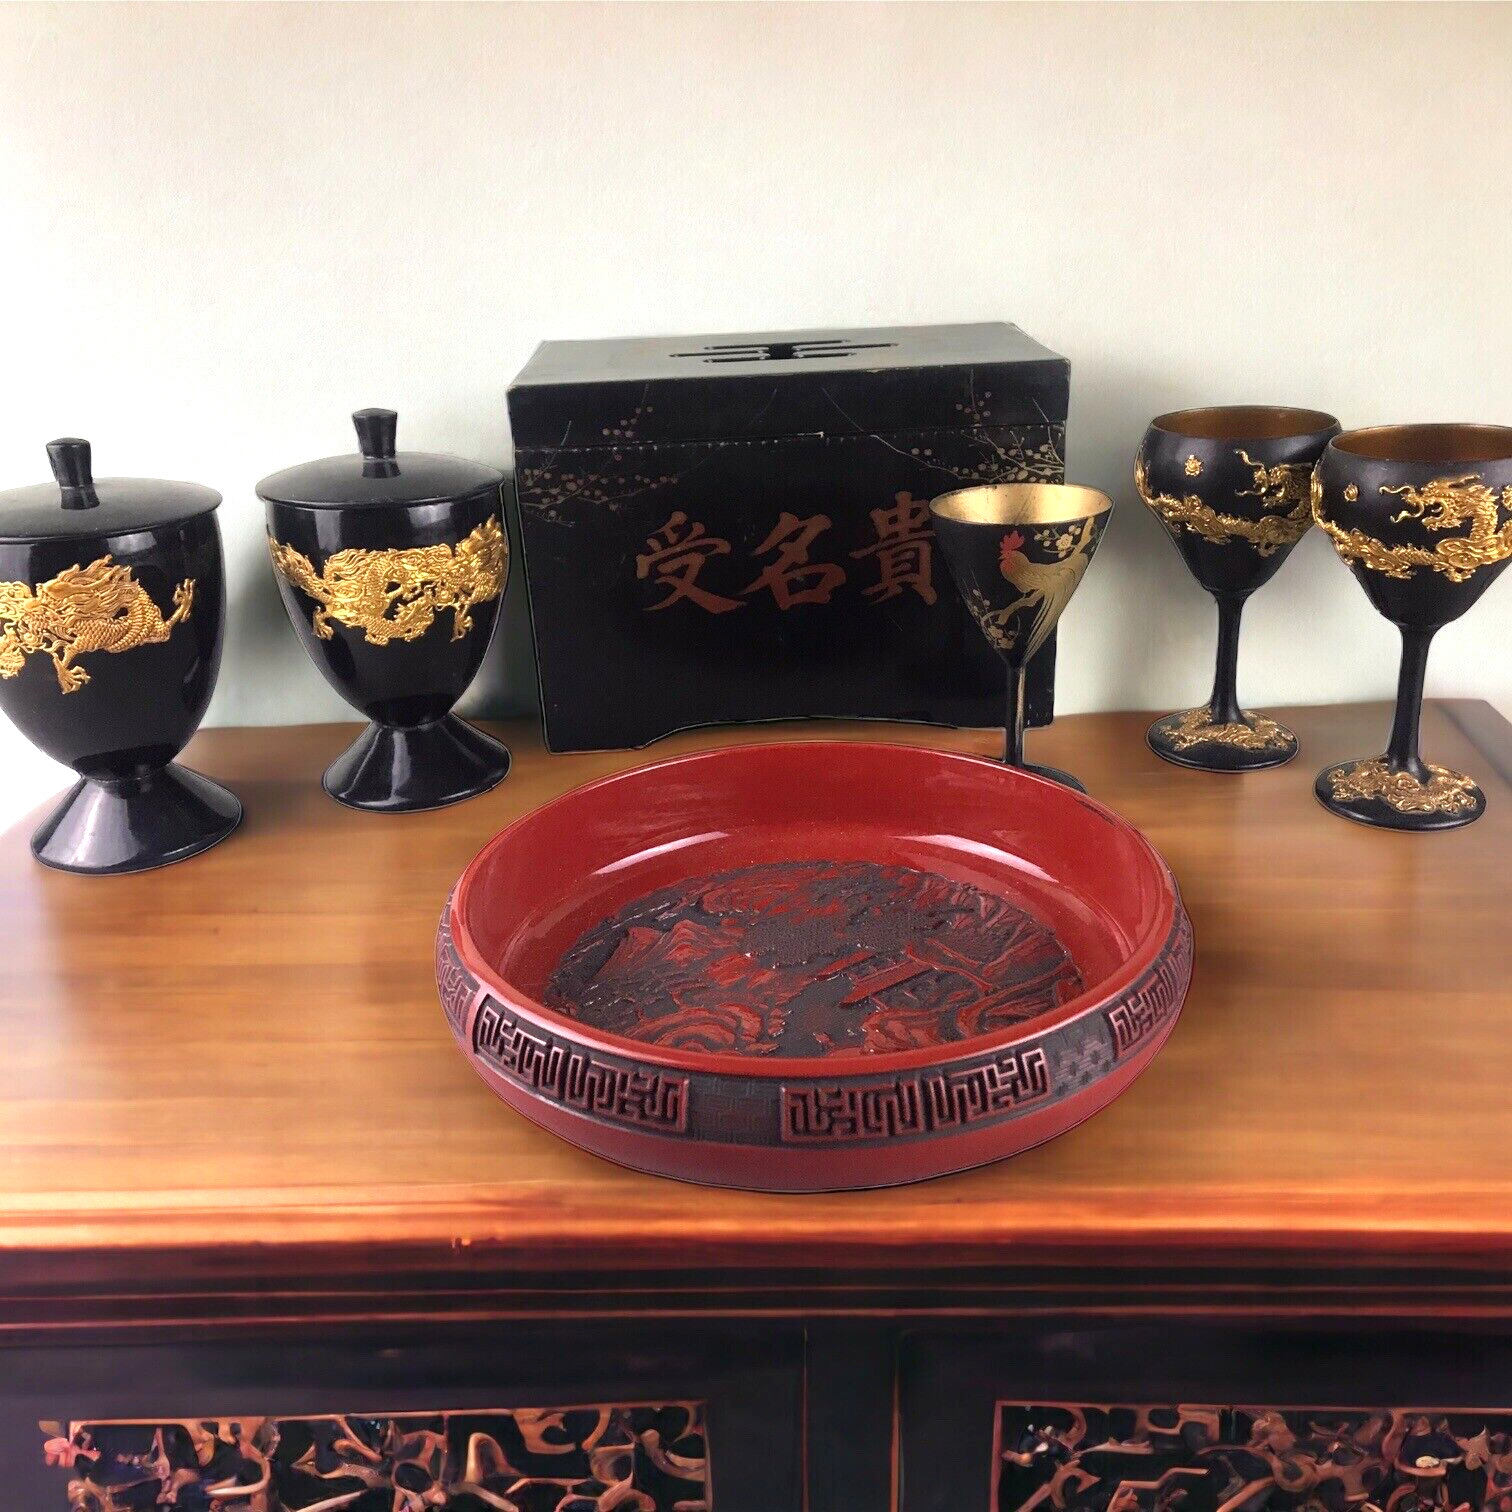 Lot Vintage Chinese Decorative Lacquer Ware Dragon Ware Box, Cups and Red Bowl